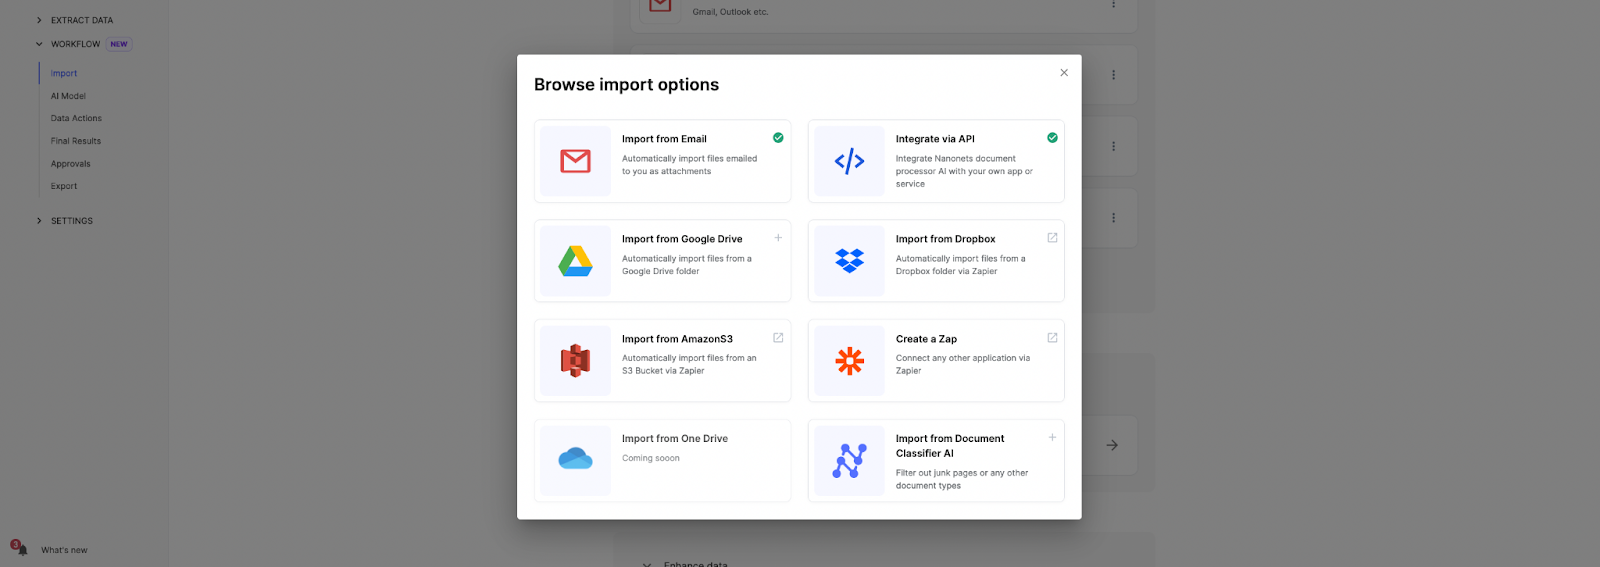 Browse import options: Nanonets interface